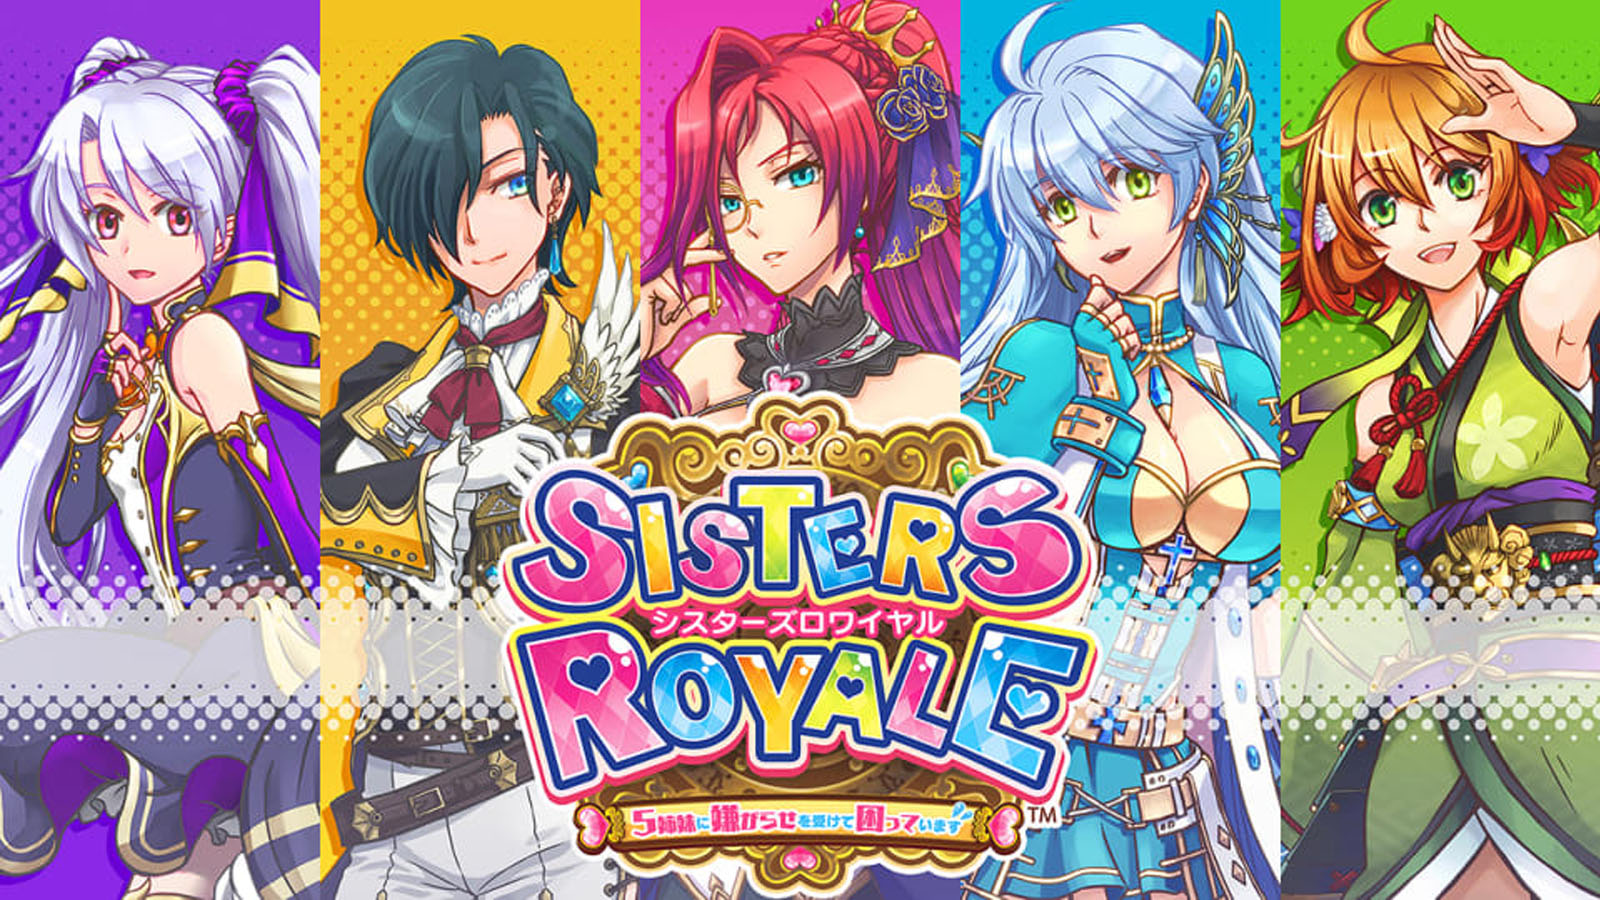 World of sisters игра. 23 Sisters игра. 5 Sisters. Sisters Royale: Five sisters under Fire 260₽ - цена с Gold\Ultimate. Is sister five